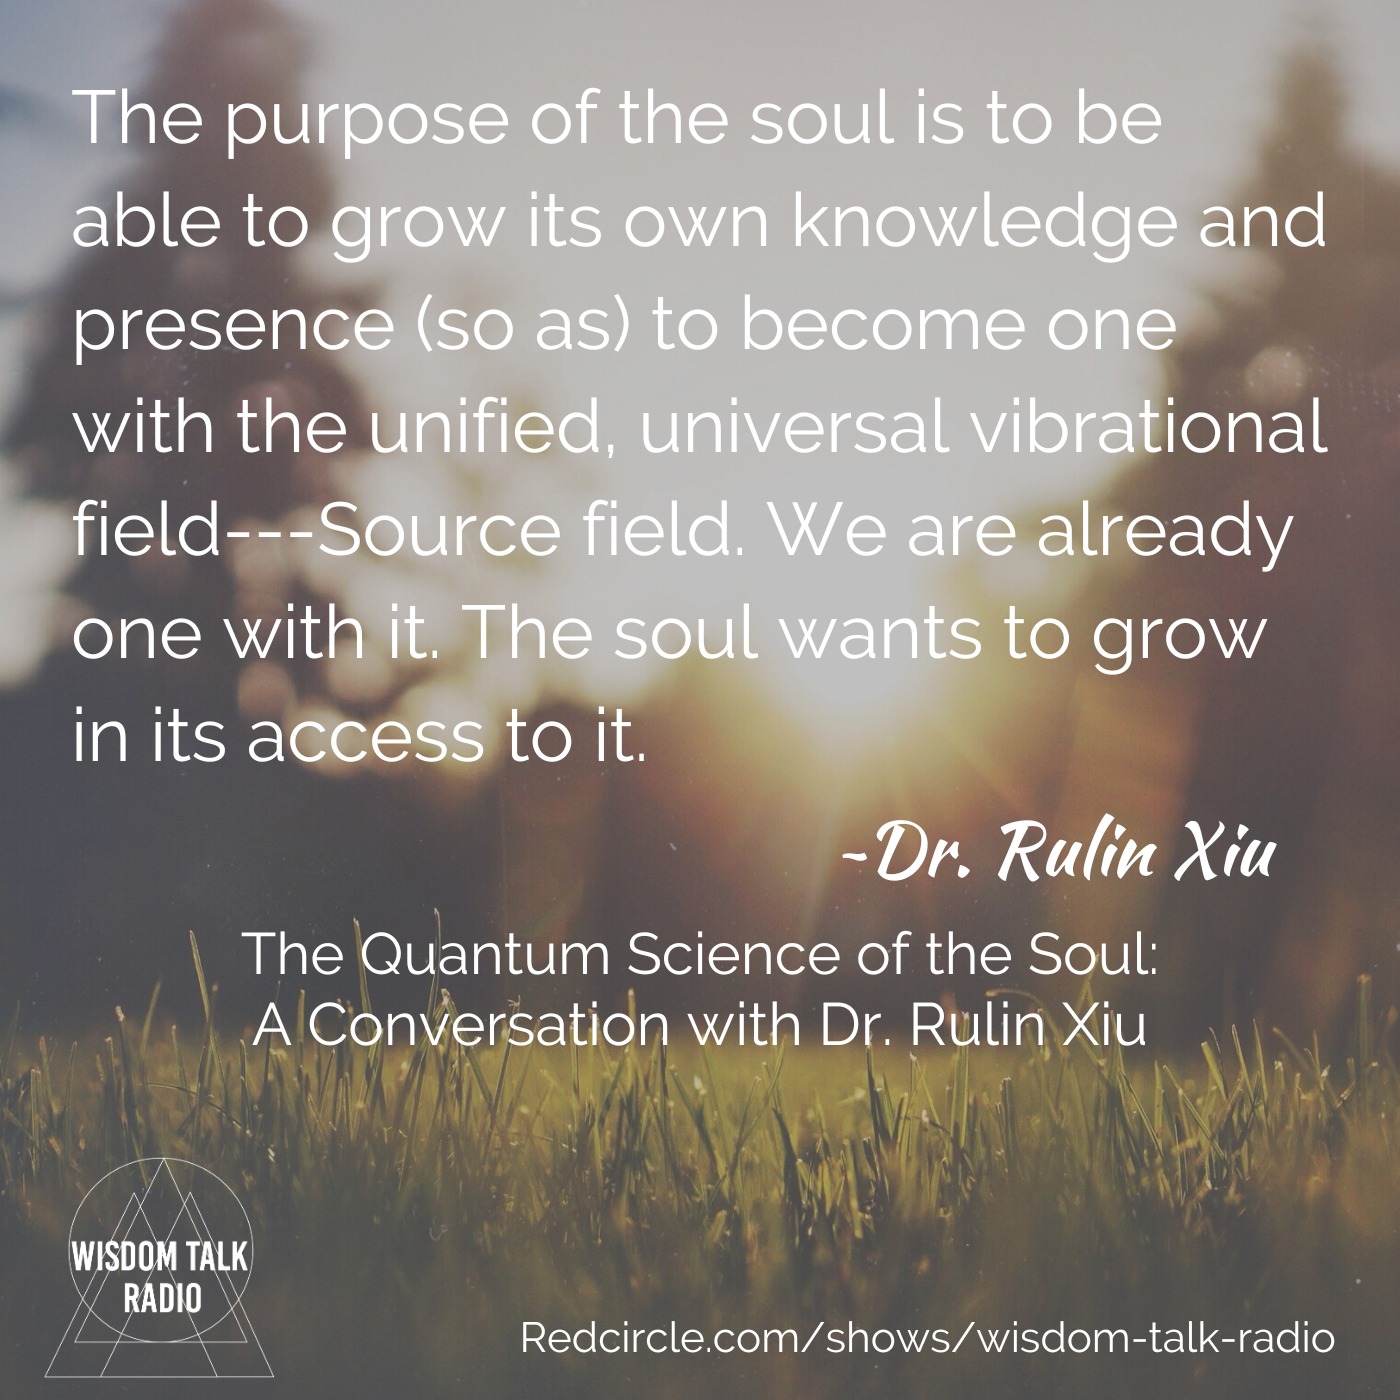 The Quantum Science of the Soul: a Conversation with Dr. Rulin Xiu